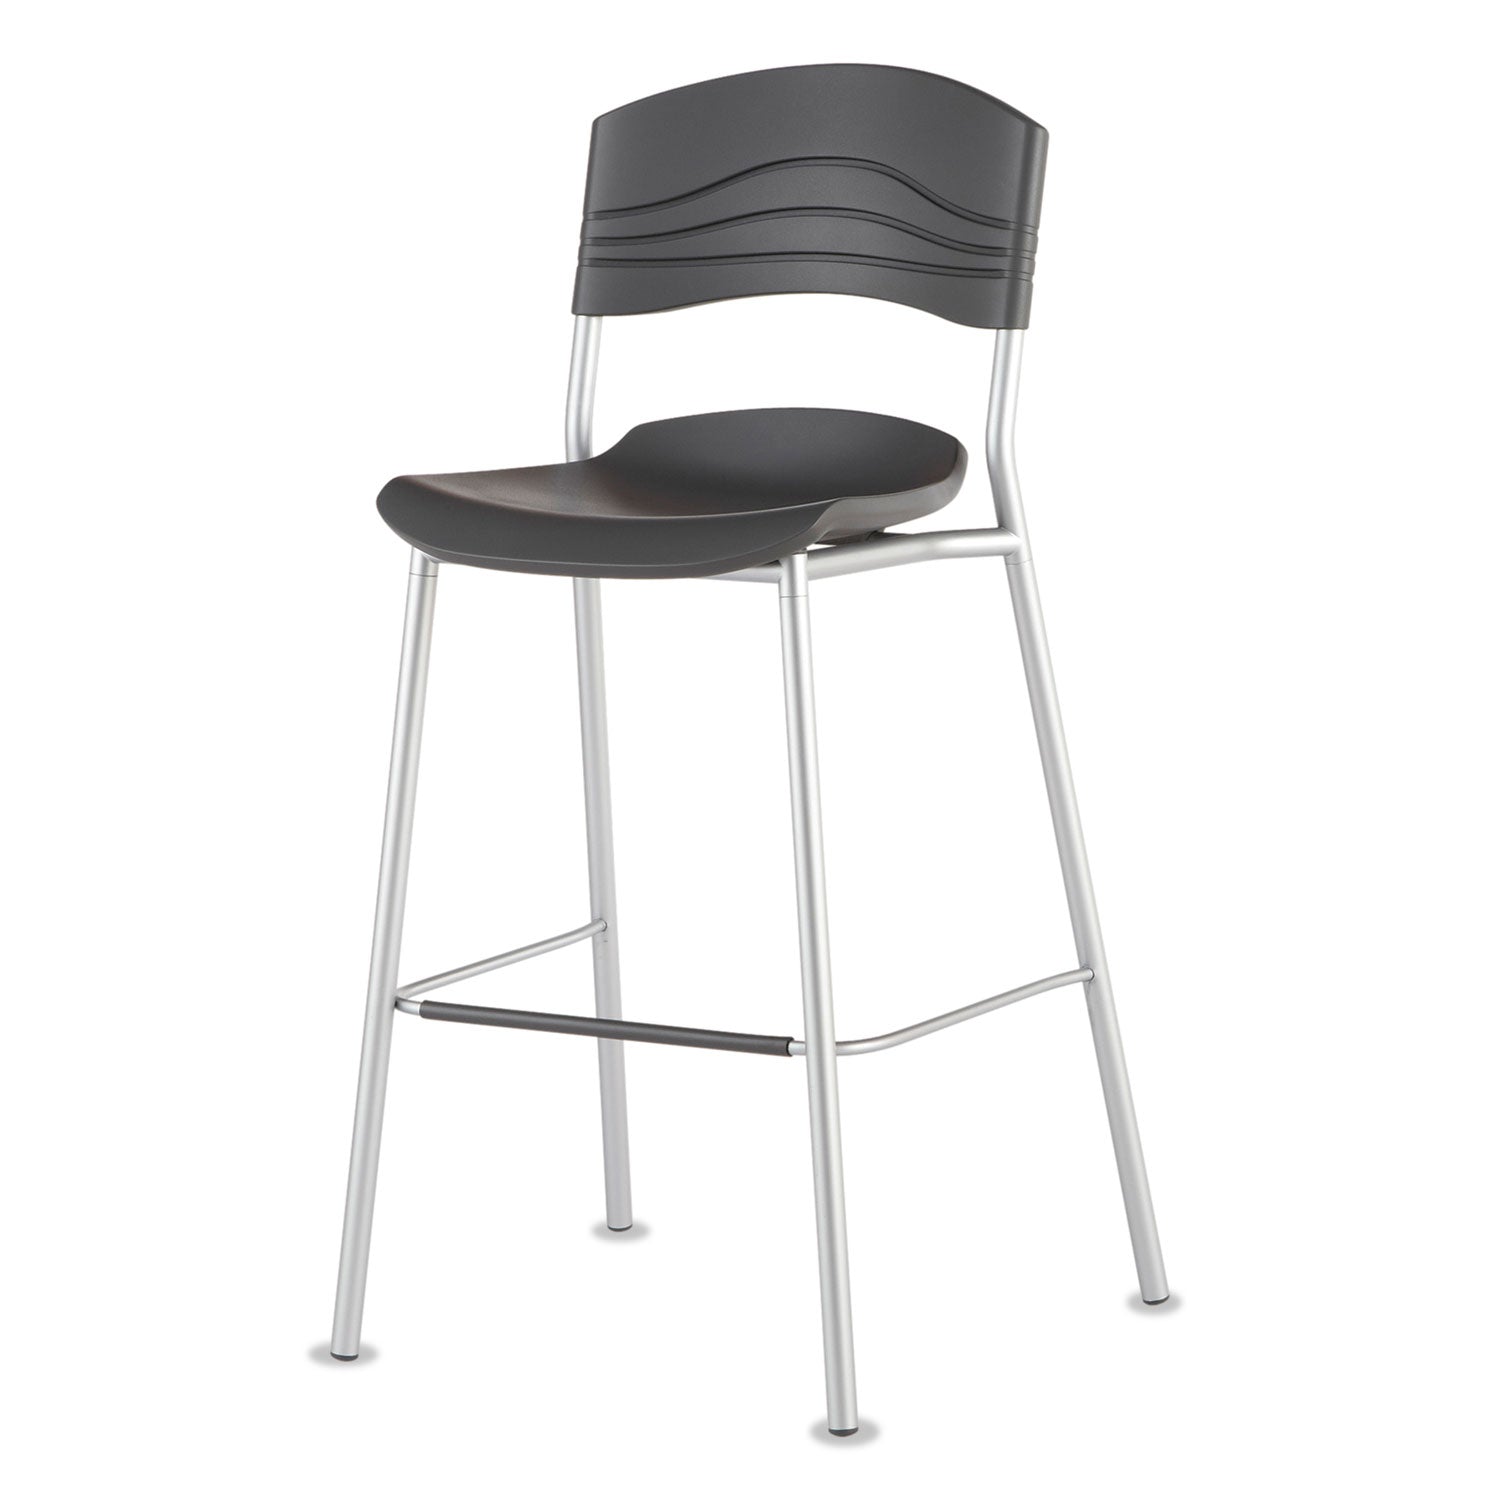 CafeWorks Stool, Supports Up to 225 lb, 30" Seat Height, Graphite Seat, Graphite Back, Silver Base - 